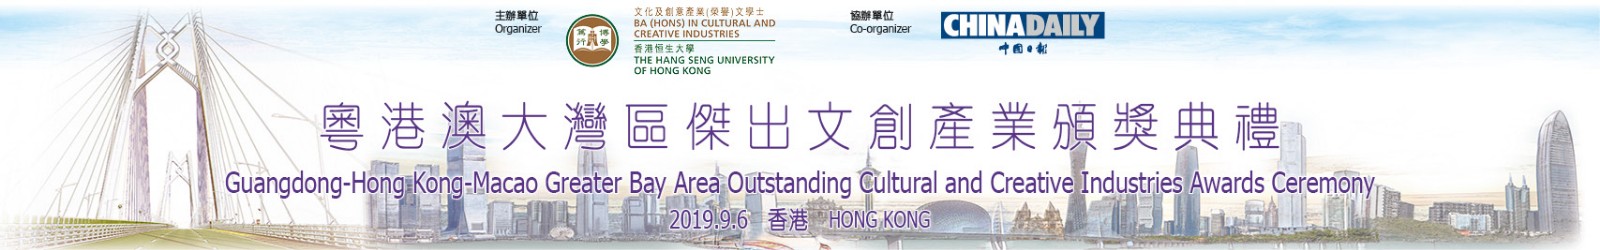 Guangdong-Hong Kong-Macao GBA Outstanding Cultural and Creative Industries Awards Ceremony